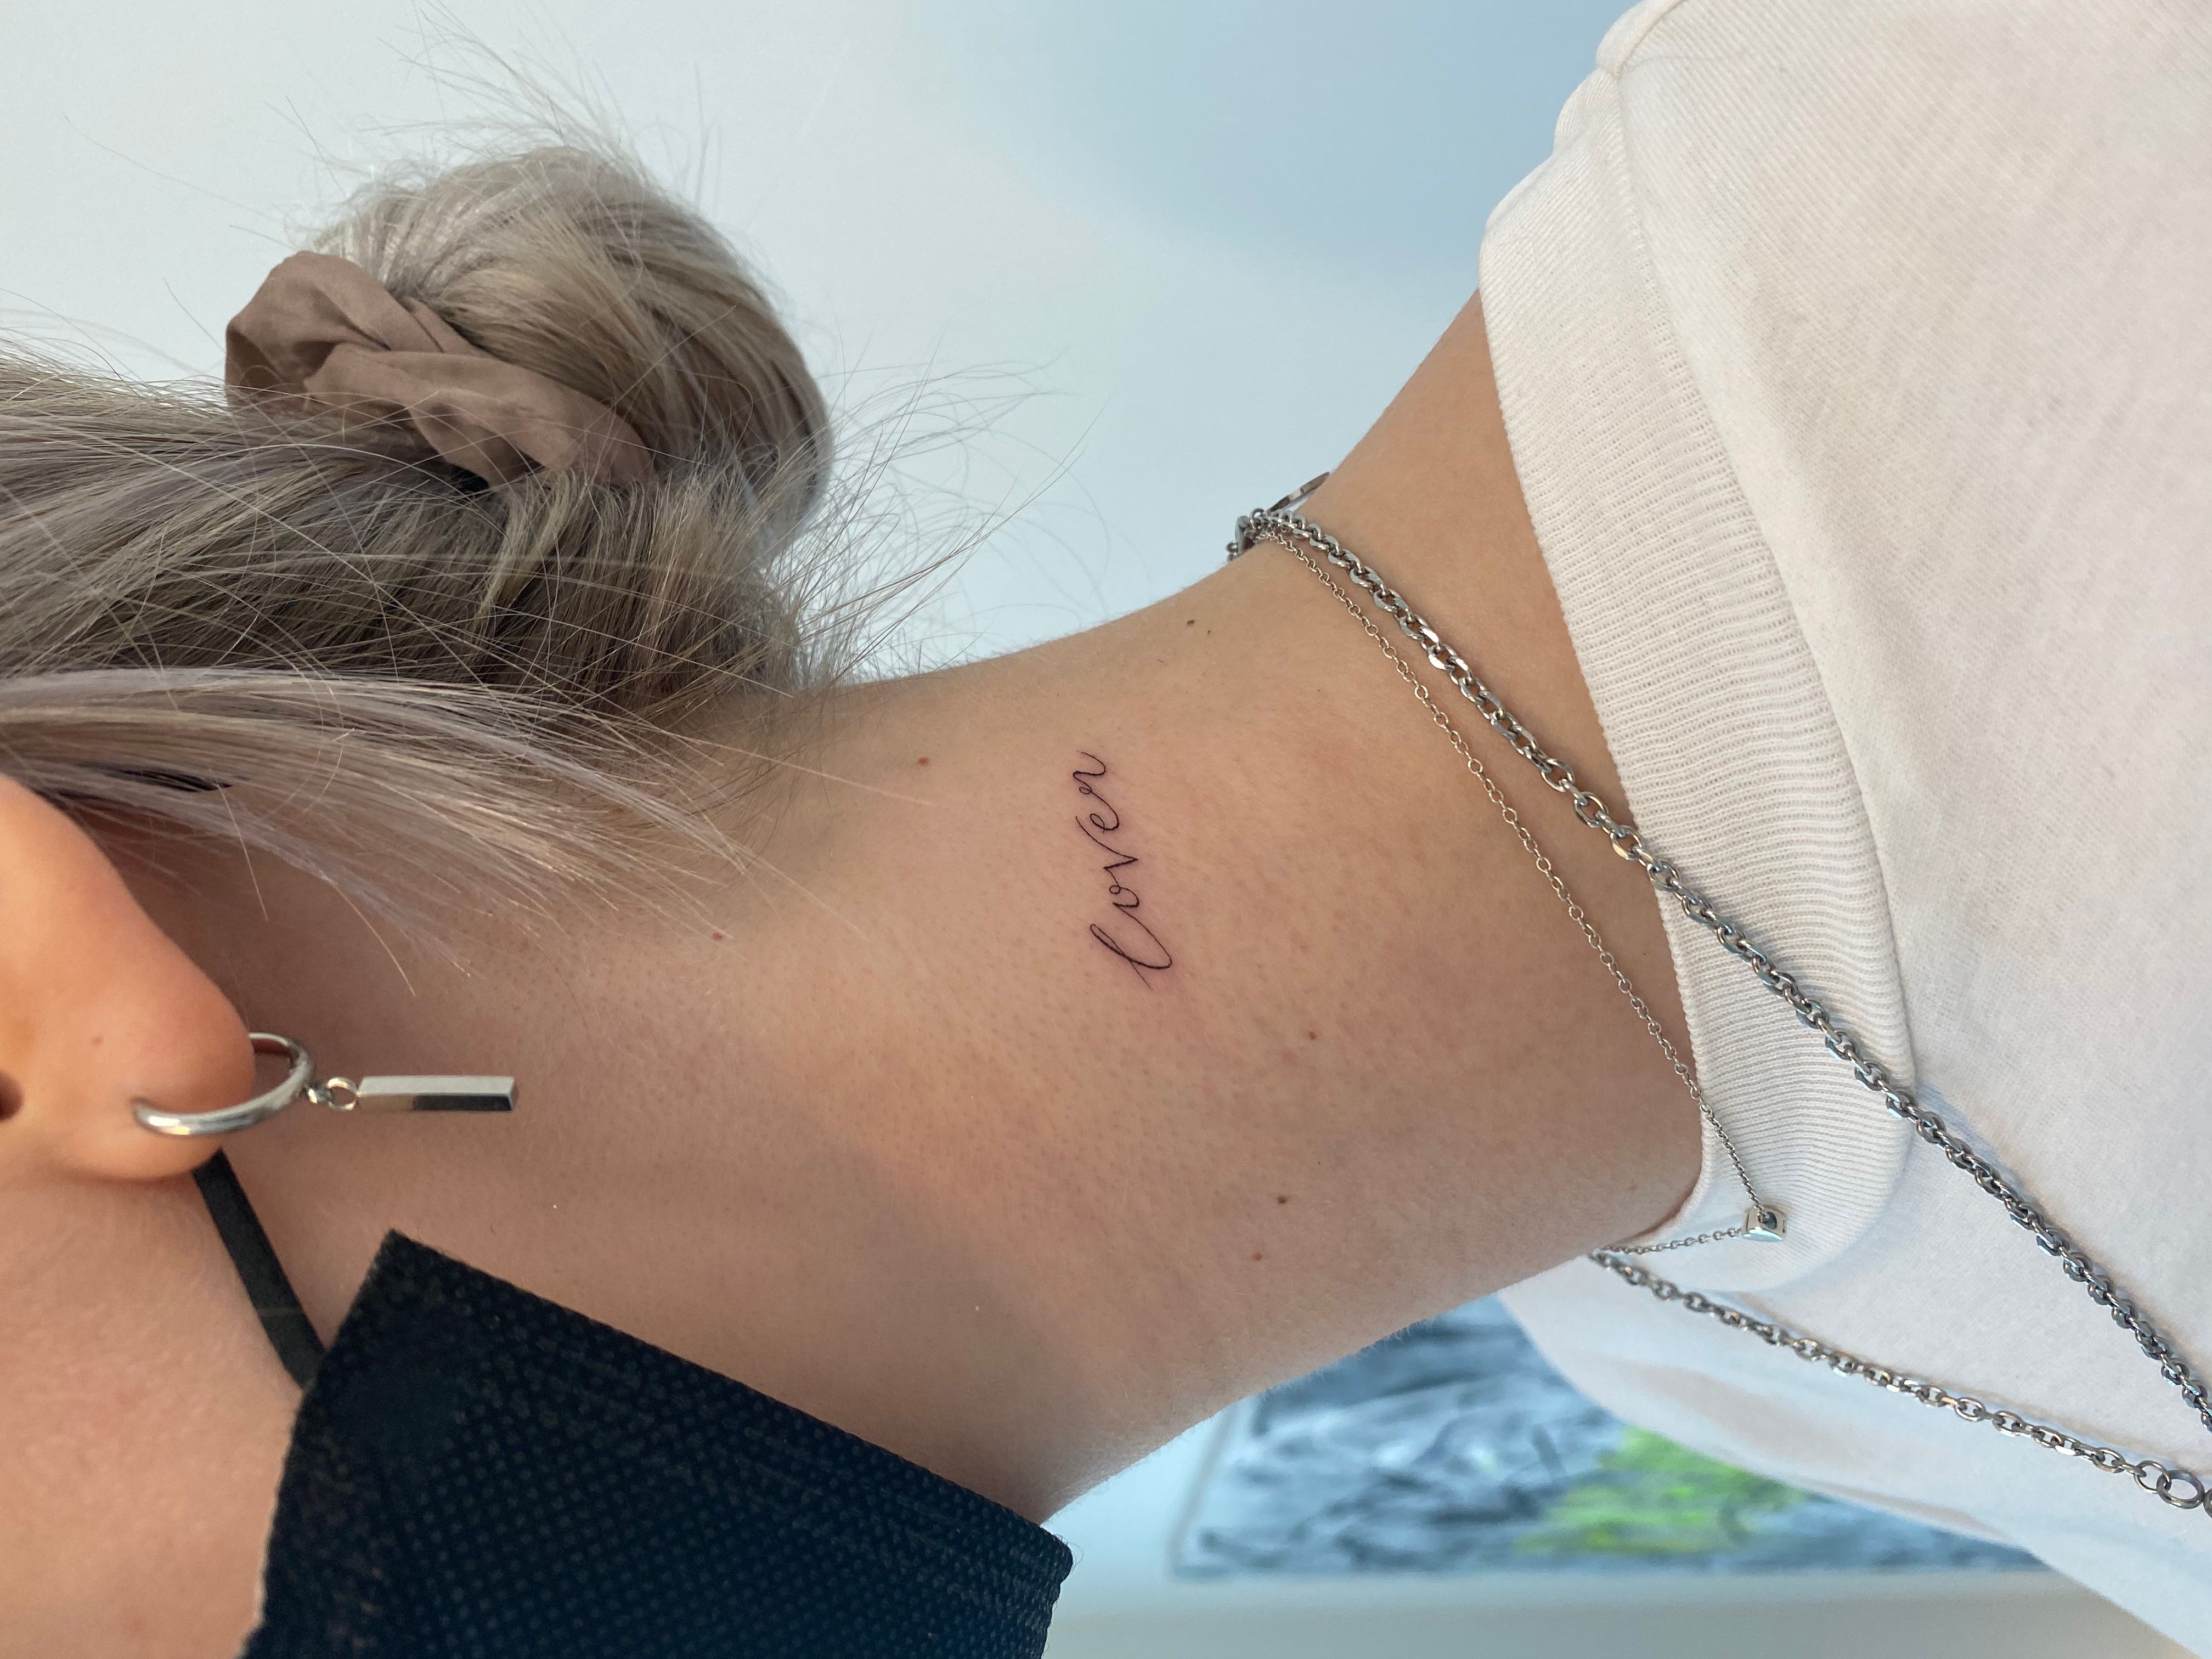 Tattoo tagged with: small, wittybutton, languages, tiny, back of neck,  ifttt, little, english, wanderlust, lettering, english word, word |  inked-app.com